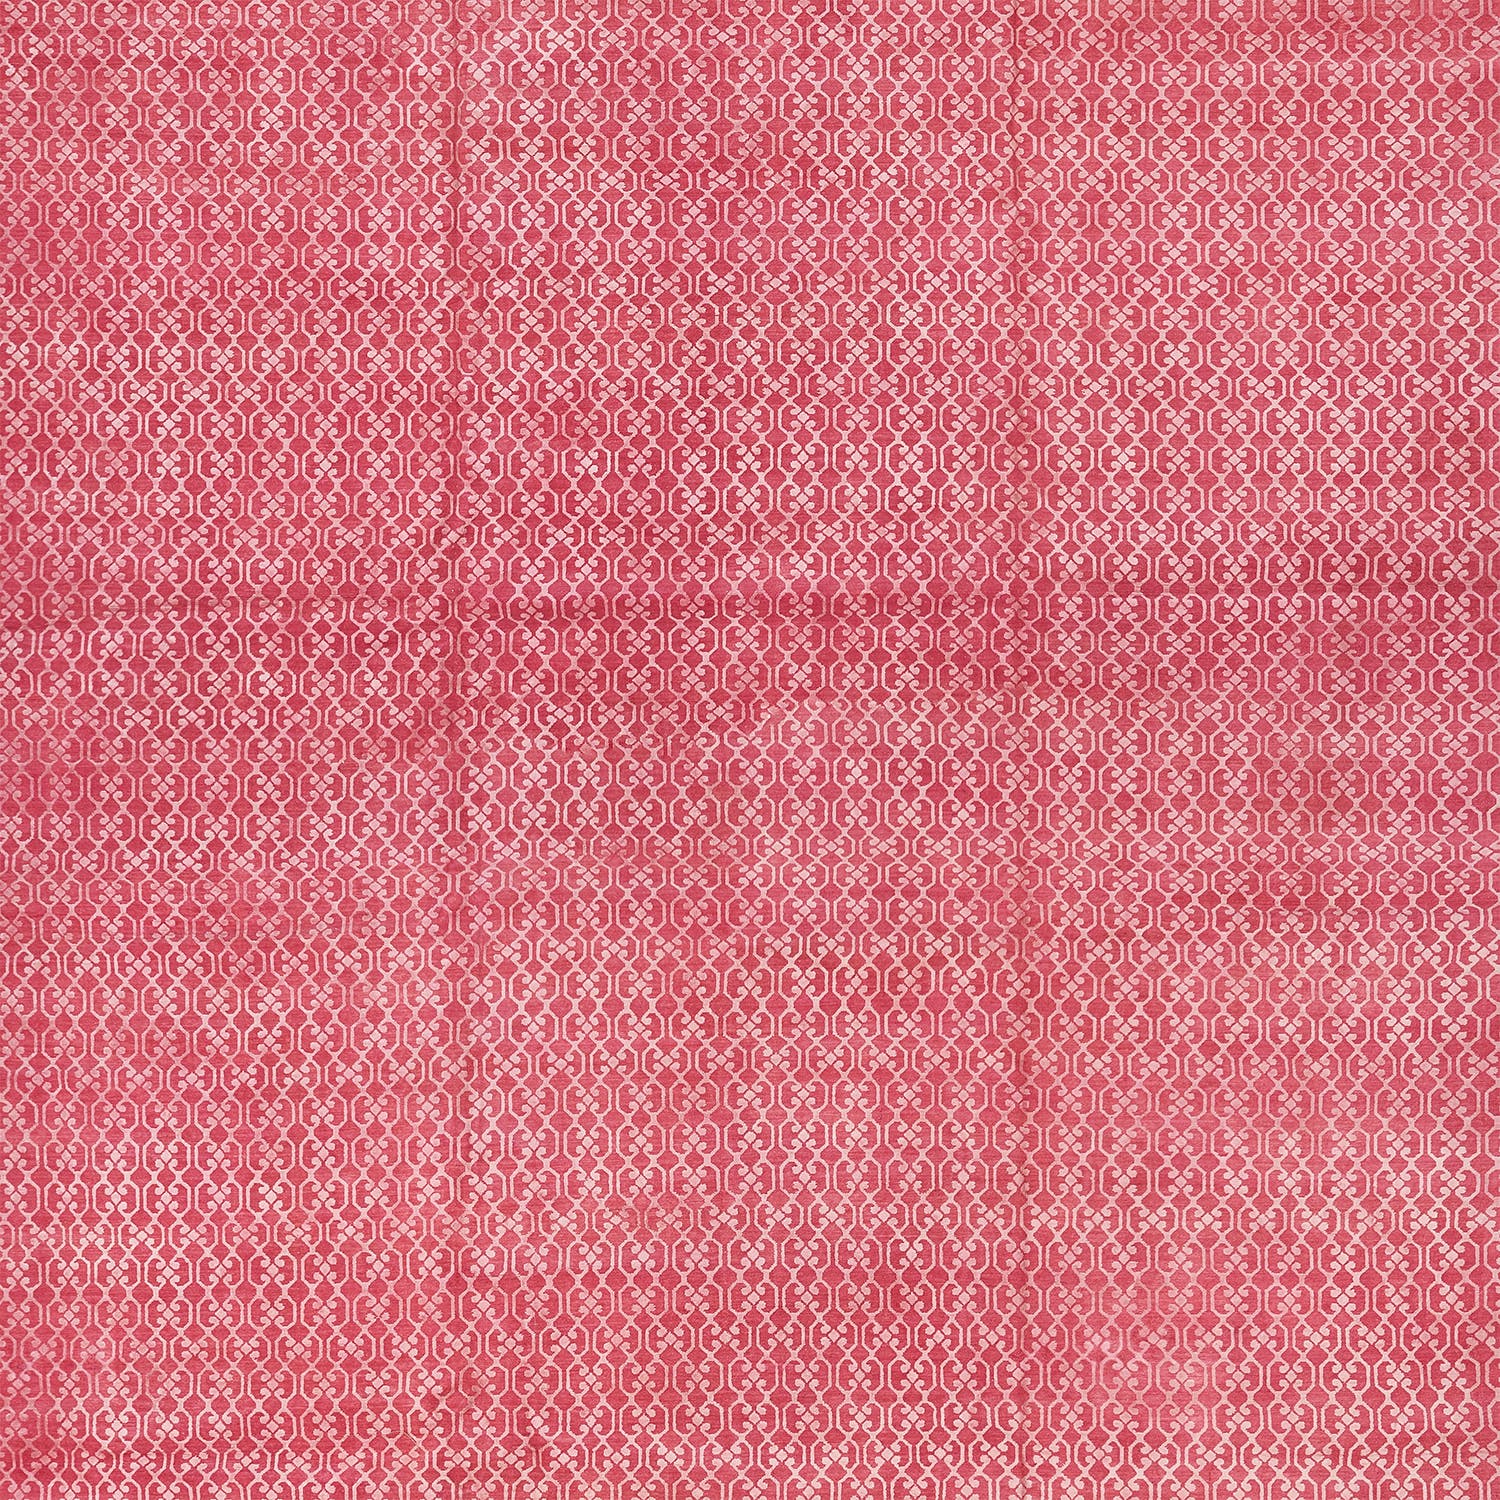 Densely packed lace-like pattern on red background creates ornateness.